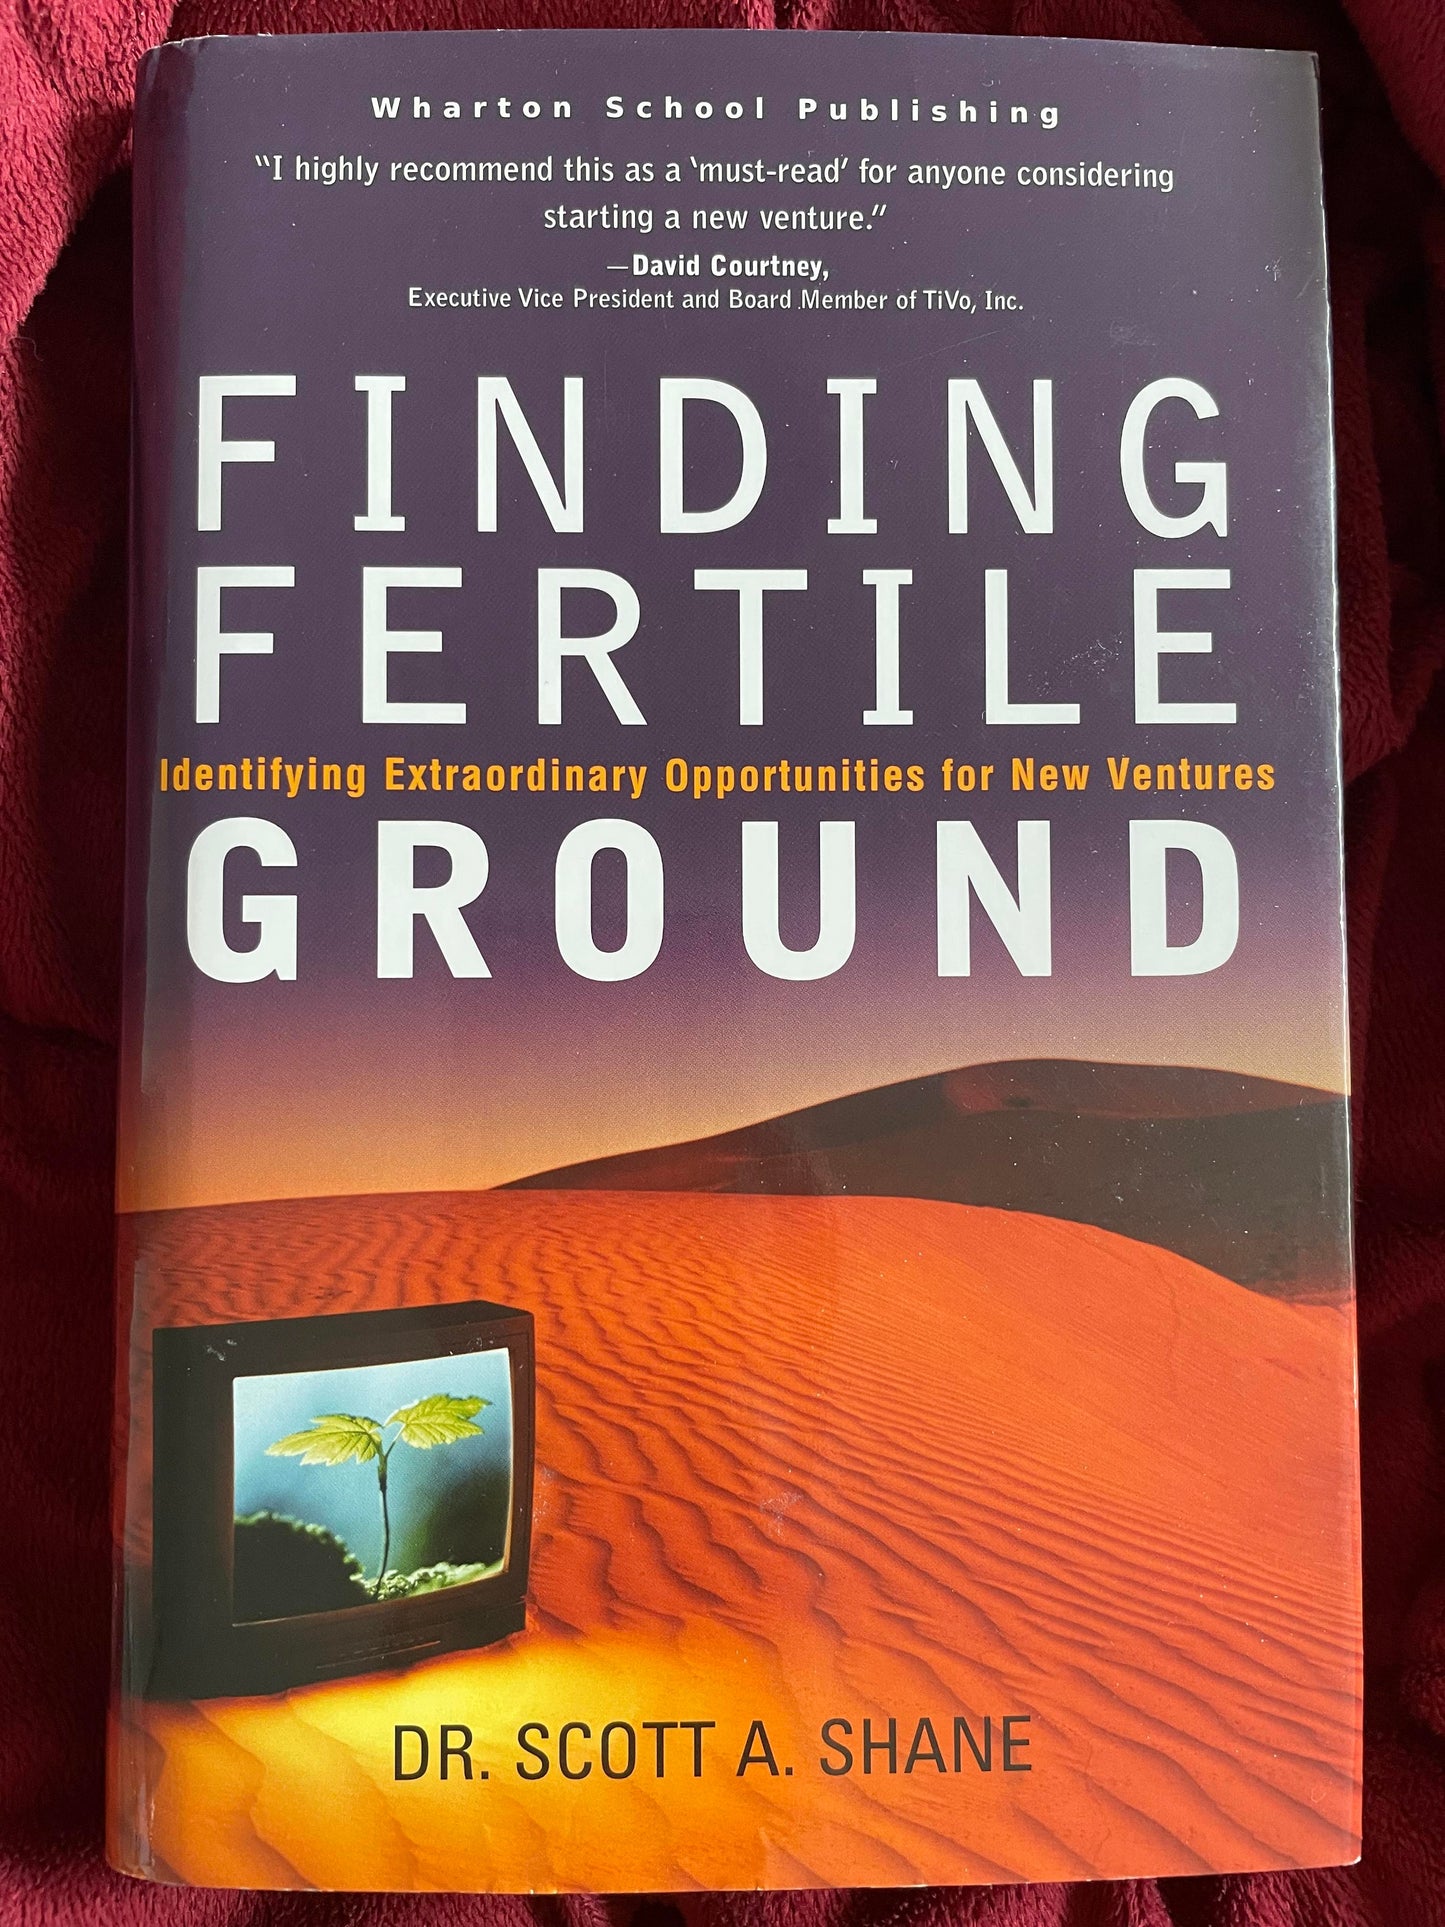 Finding Fertile Ground: Identifying Extraordinary Opportunities for New Ventures (Hardcover)